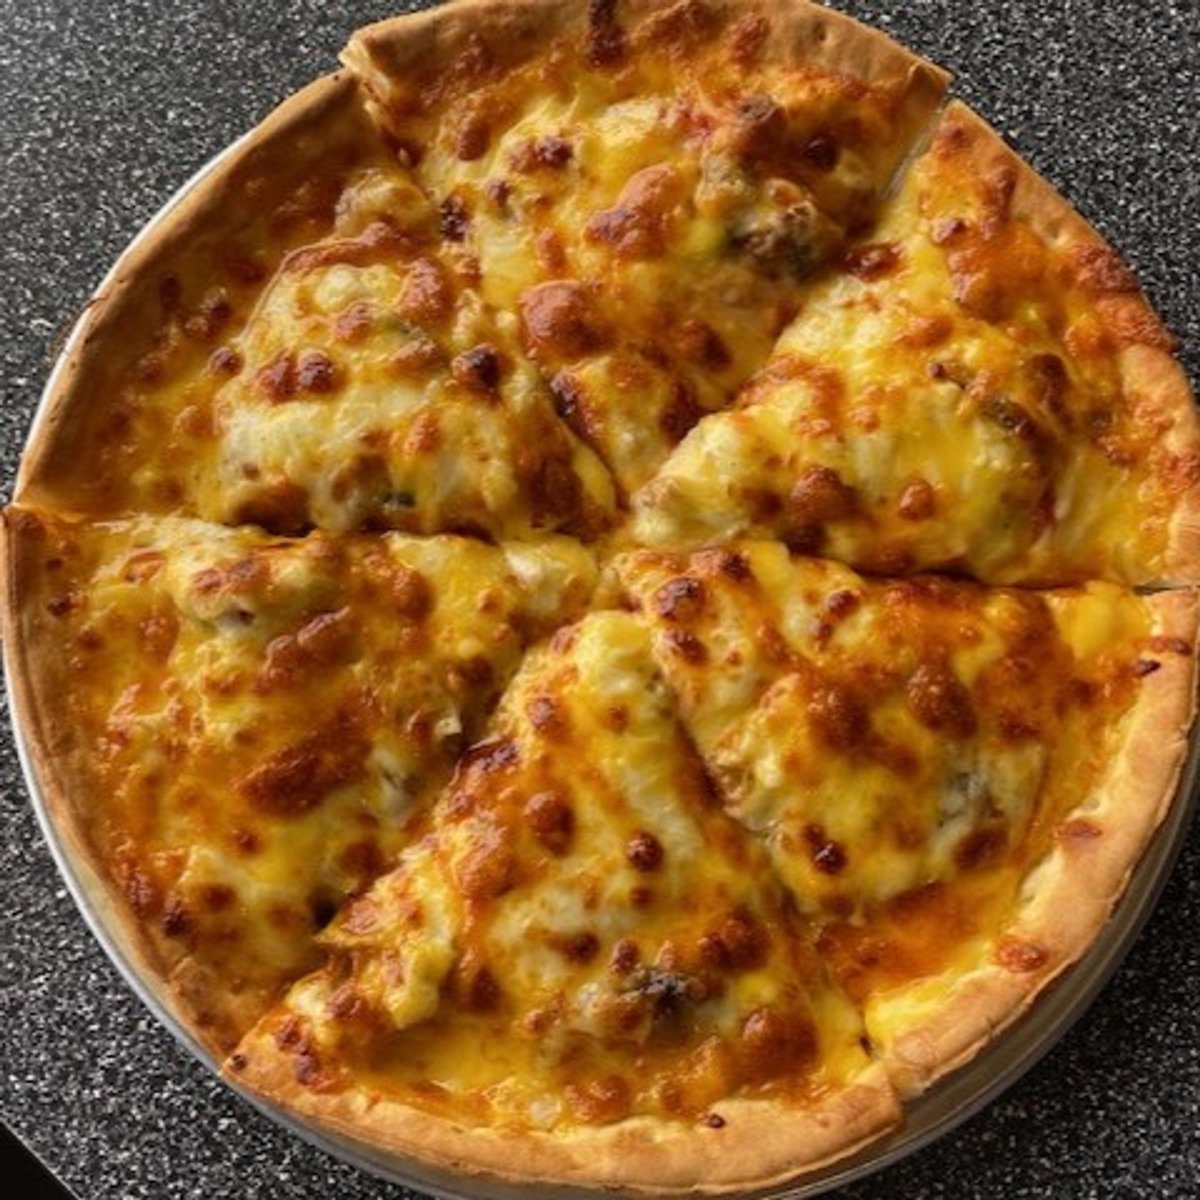 Luigi has some new pizzas for your tastebuds, including Shannon's Grate, made with tons of cheese and other goodies.

#pizza #andover #wichita #kansas #cheese #pepperoni #sausage #lunch #dinner #pepper #chicken #ham #dough #tomatosauce #pork #onion #calzone #salad #cheesecake